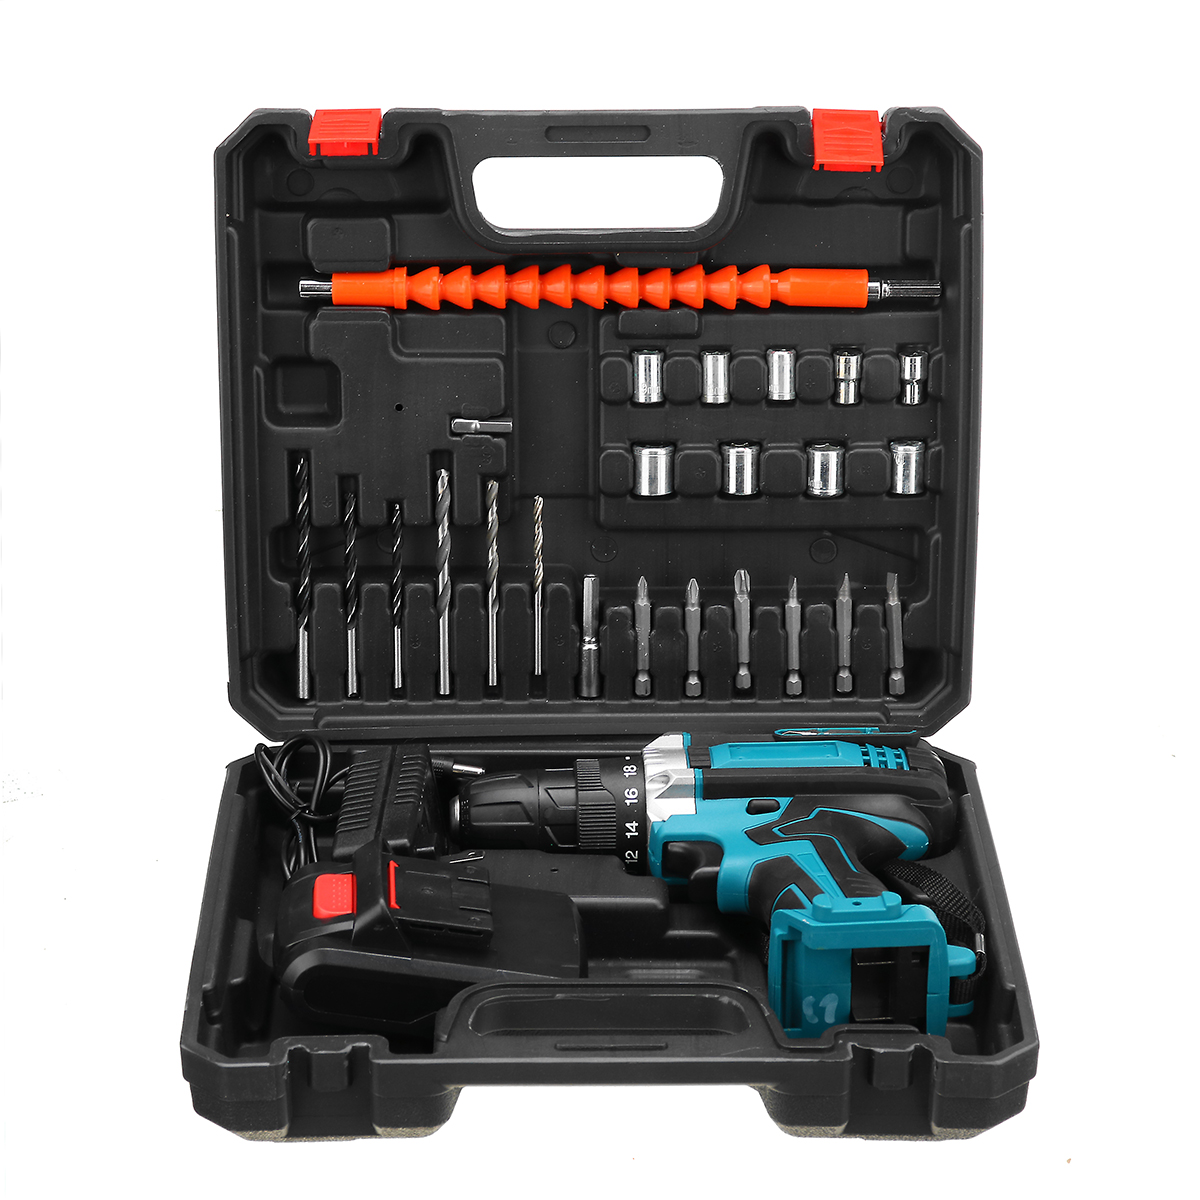 2000rpm-Impact-Drill-Driver-Rechargeable-Electric-Screwdriver-Portable-Wood-Metal-Drilling-Tool-w-1p-1852108-9